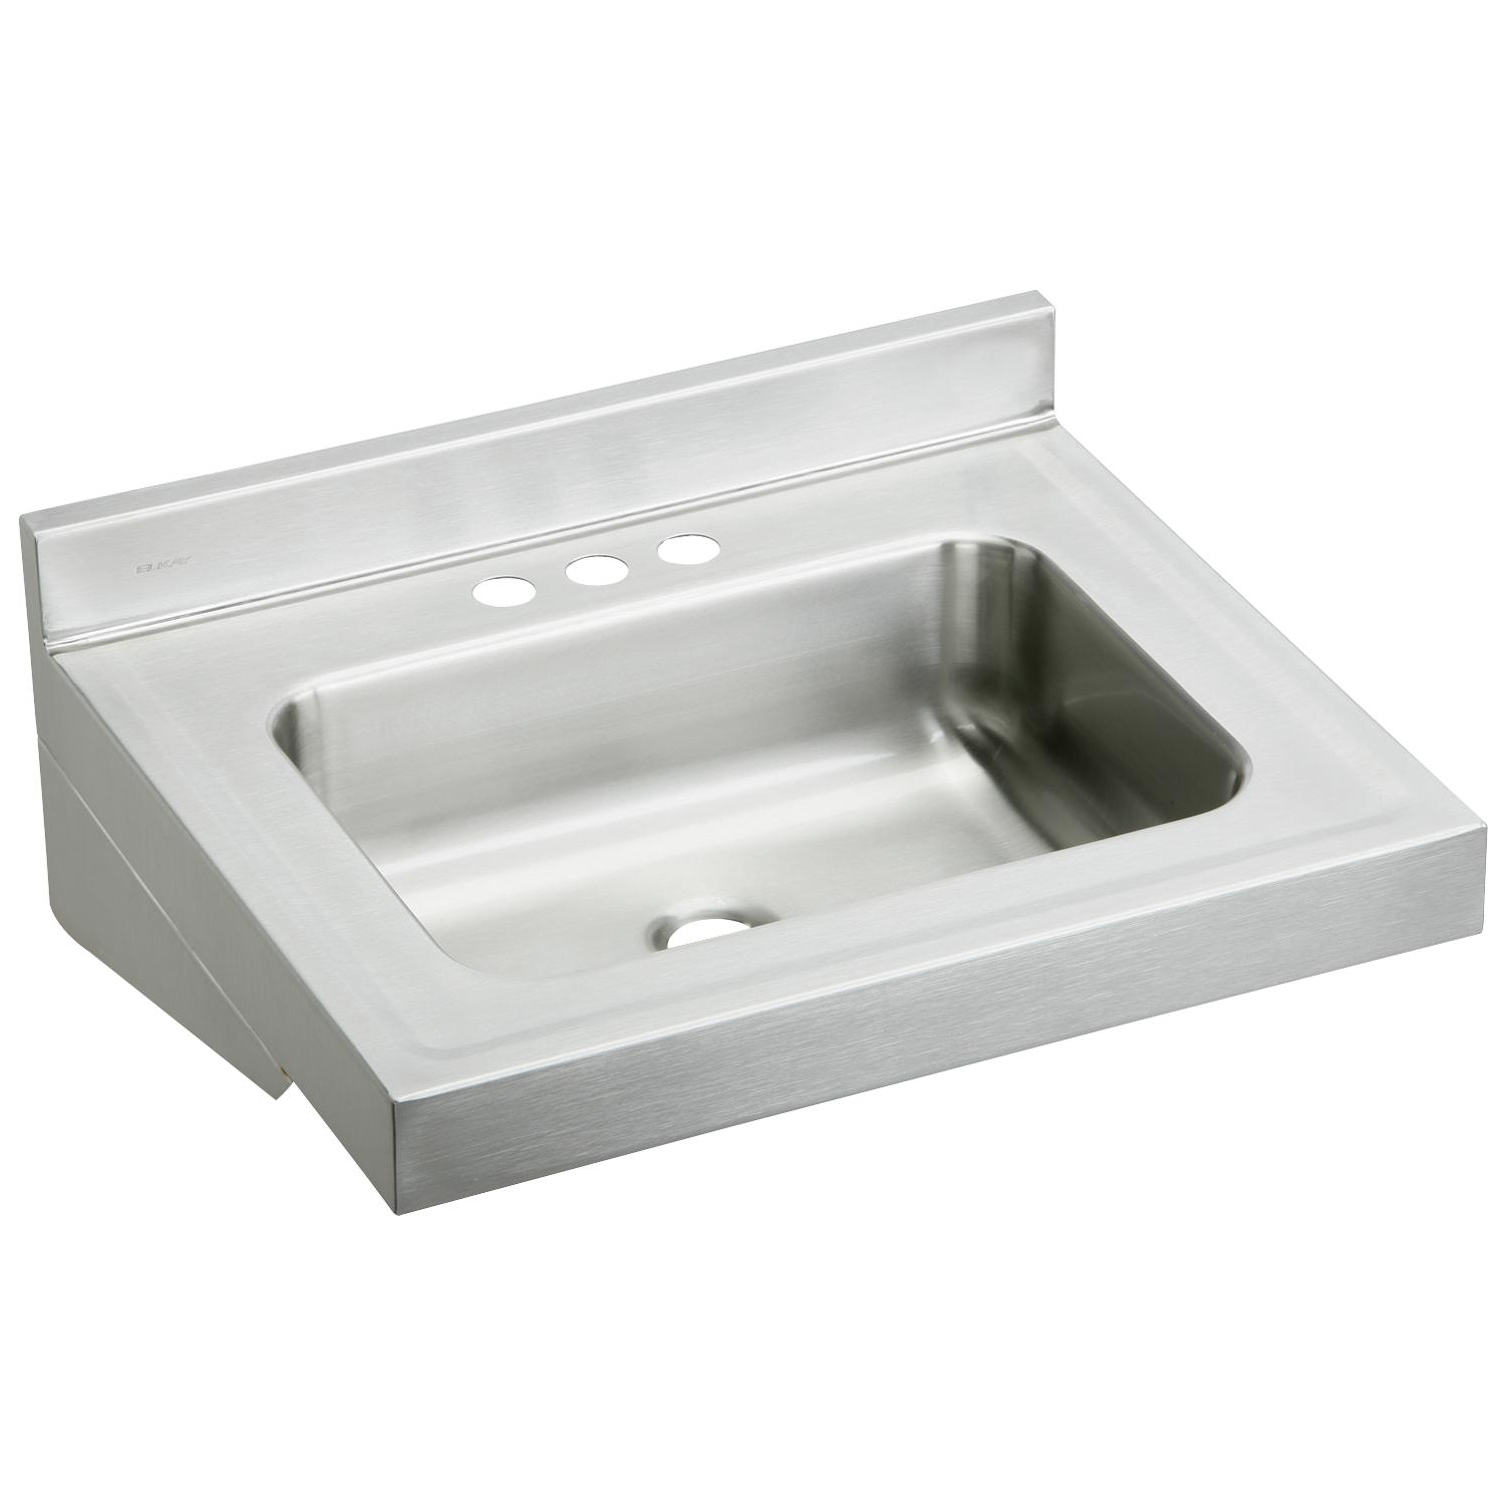 Elkay Stainless Steel 22x19" Wall Hung Lavatory Sink